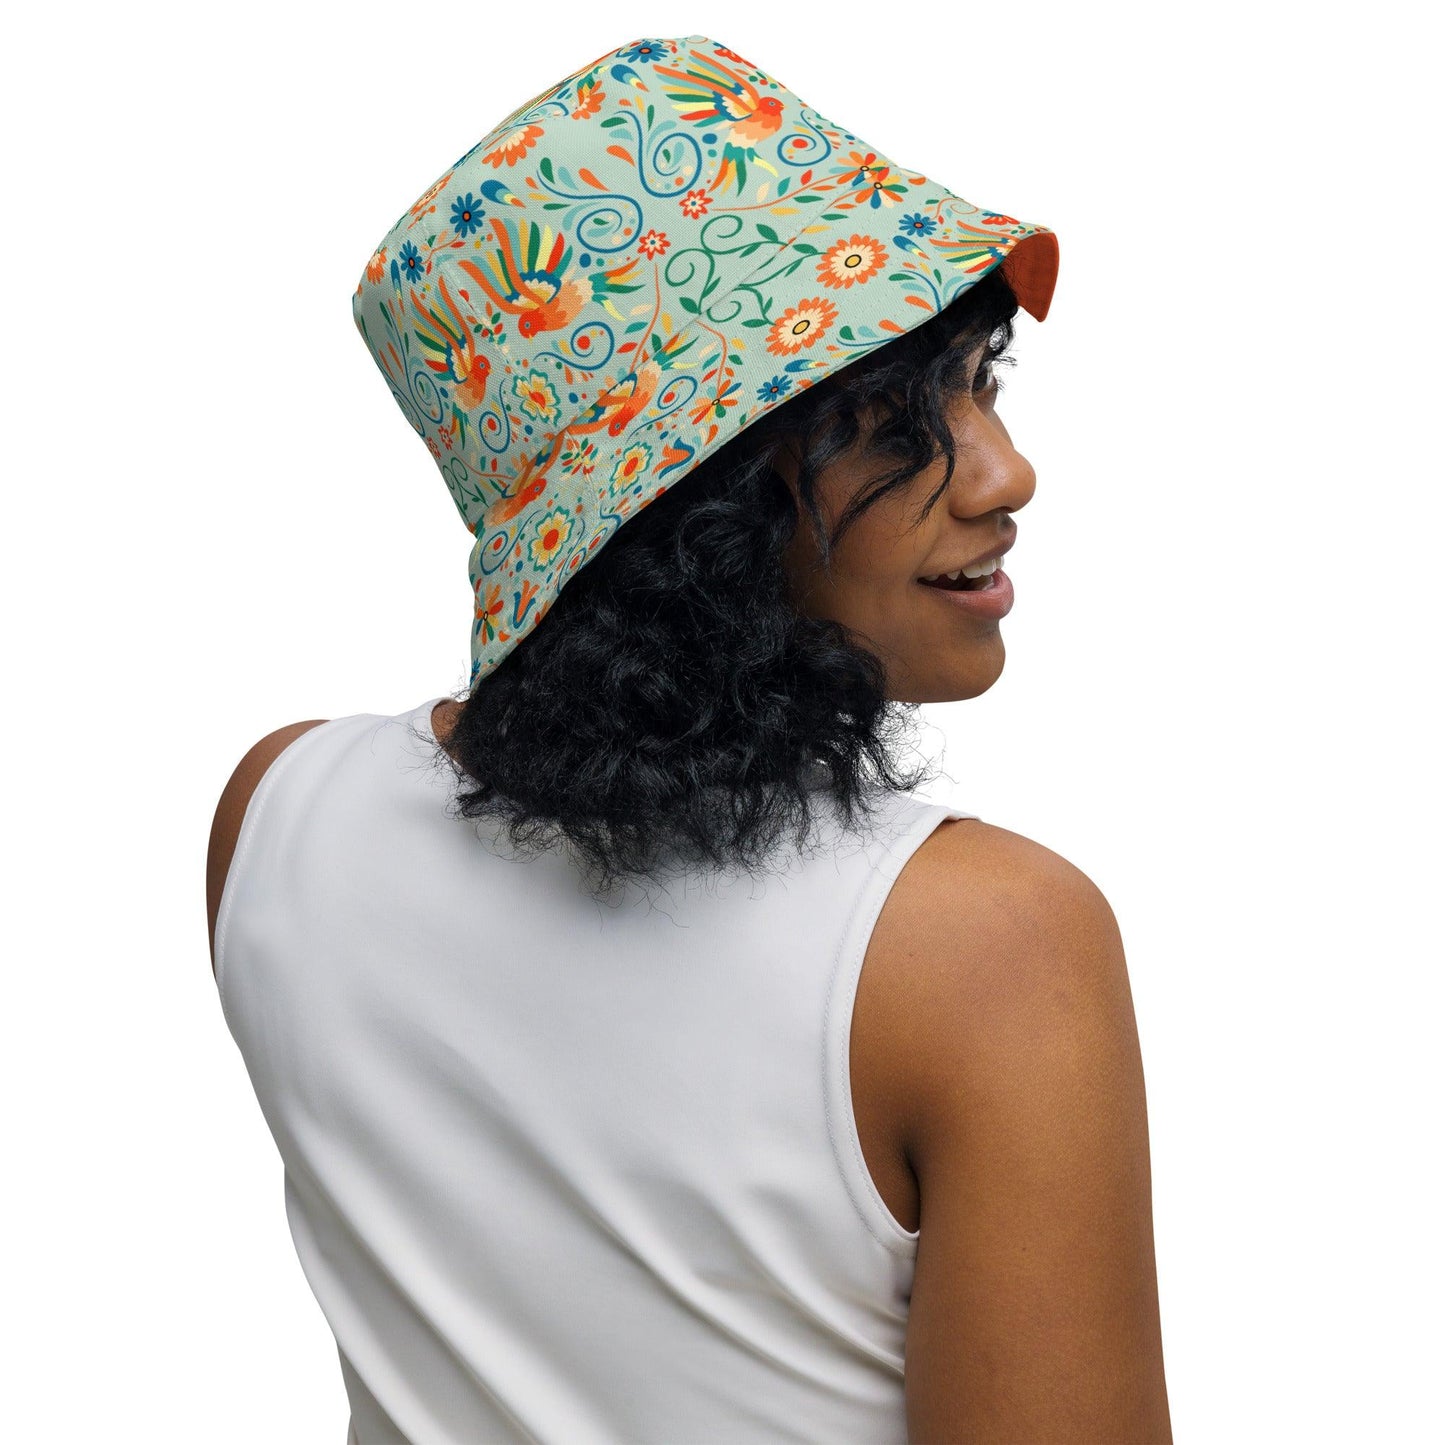 Mexican Otomi Reversible Bucket Hat - The Global Wanderer